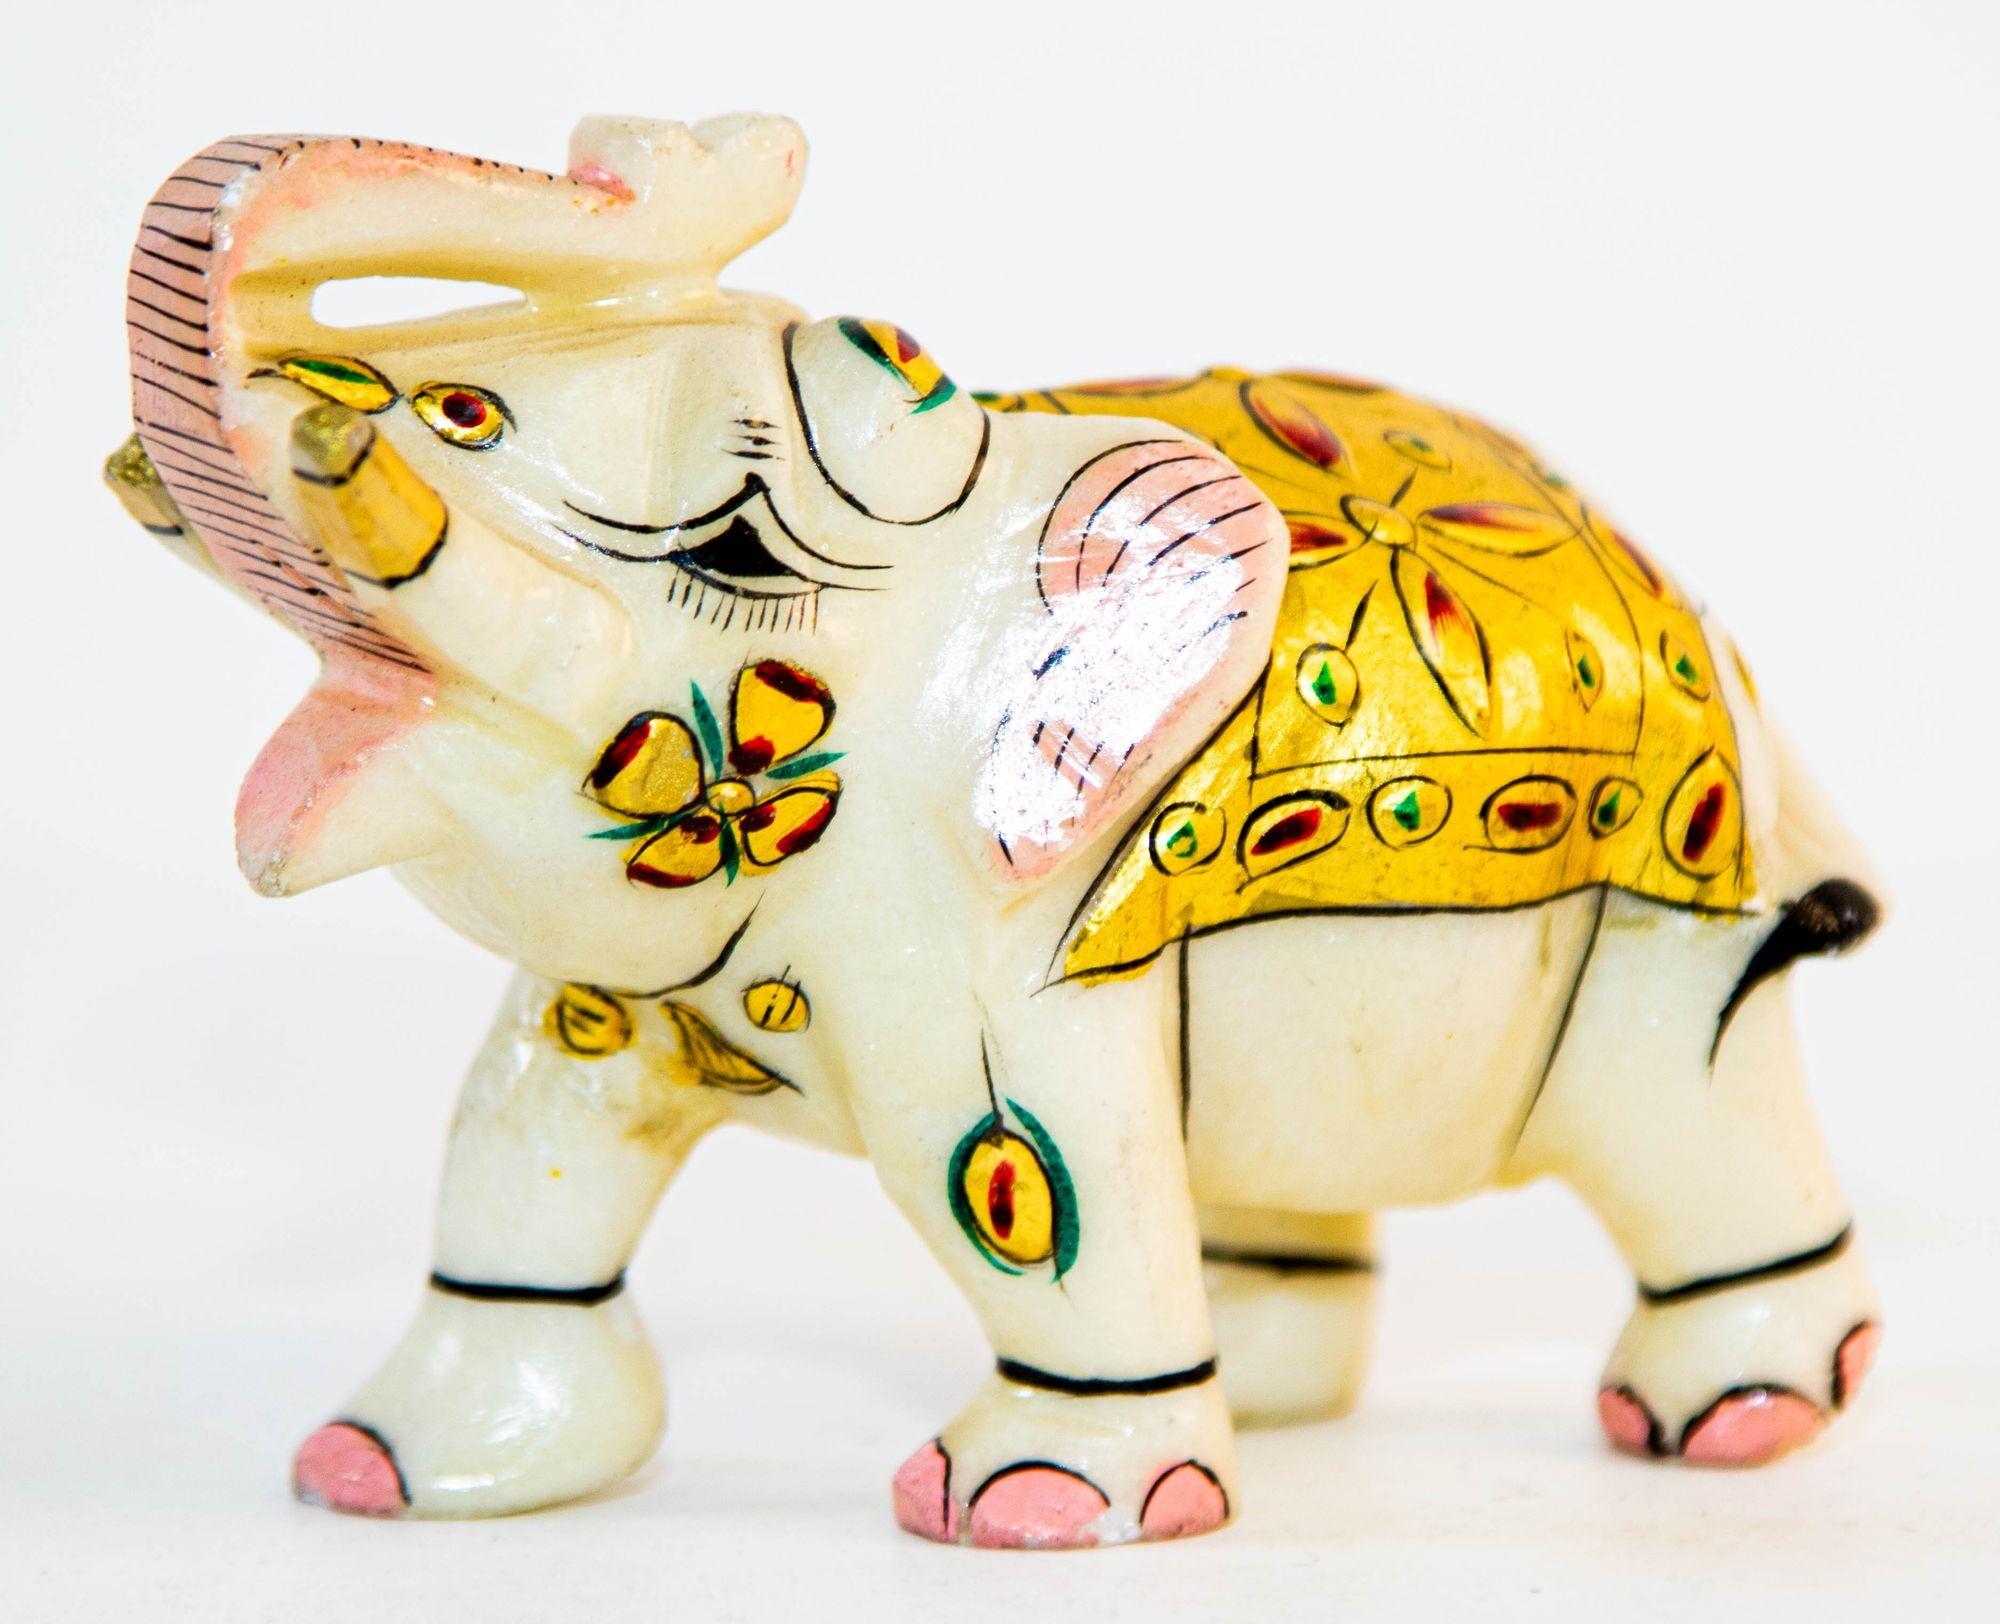 Vintage white marble Mughal Jeweled elephant sculpture paper weight.
Finely hand painted animal sculpture of an elephant with colorful gold, pink and red color paint.
Collectible ceremonial hand carved white marble stone sculpture figurine